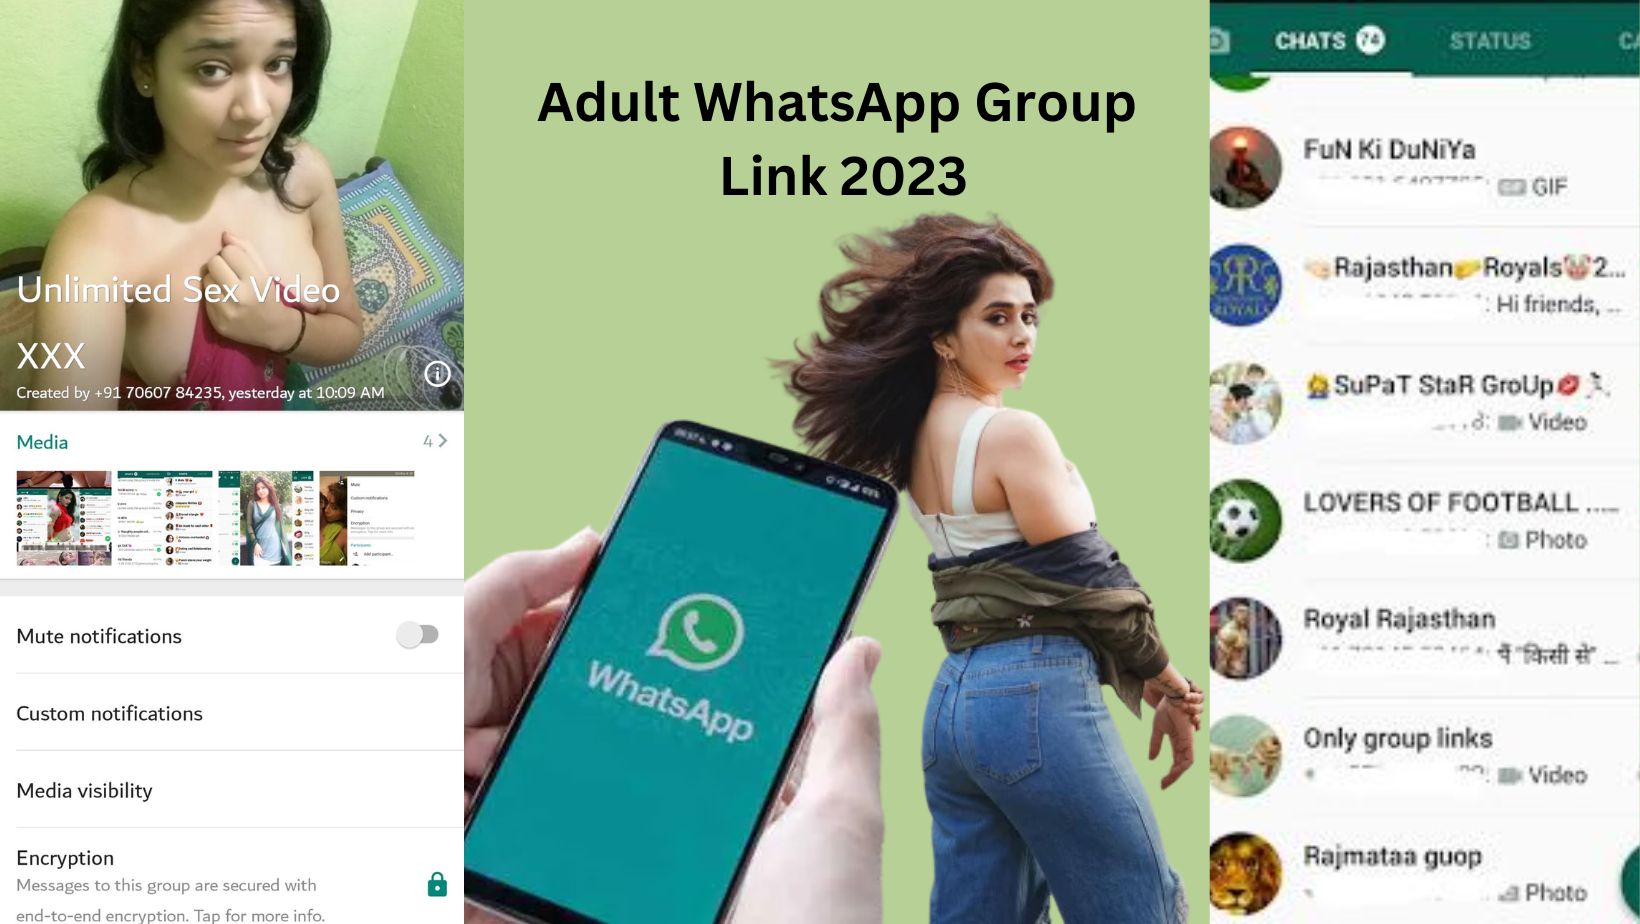 Adult WhatsApp Group Link 2023